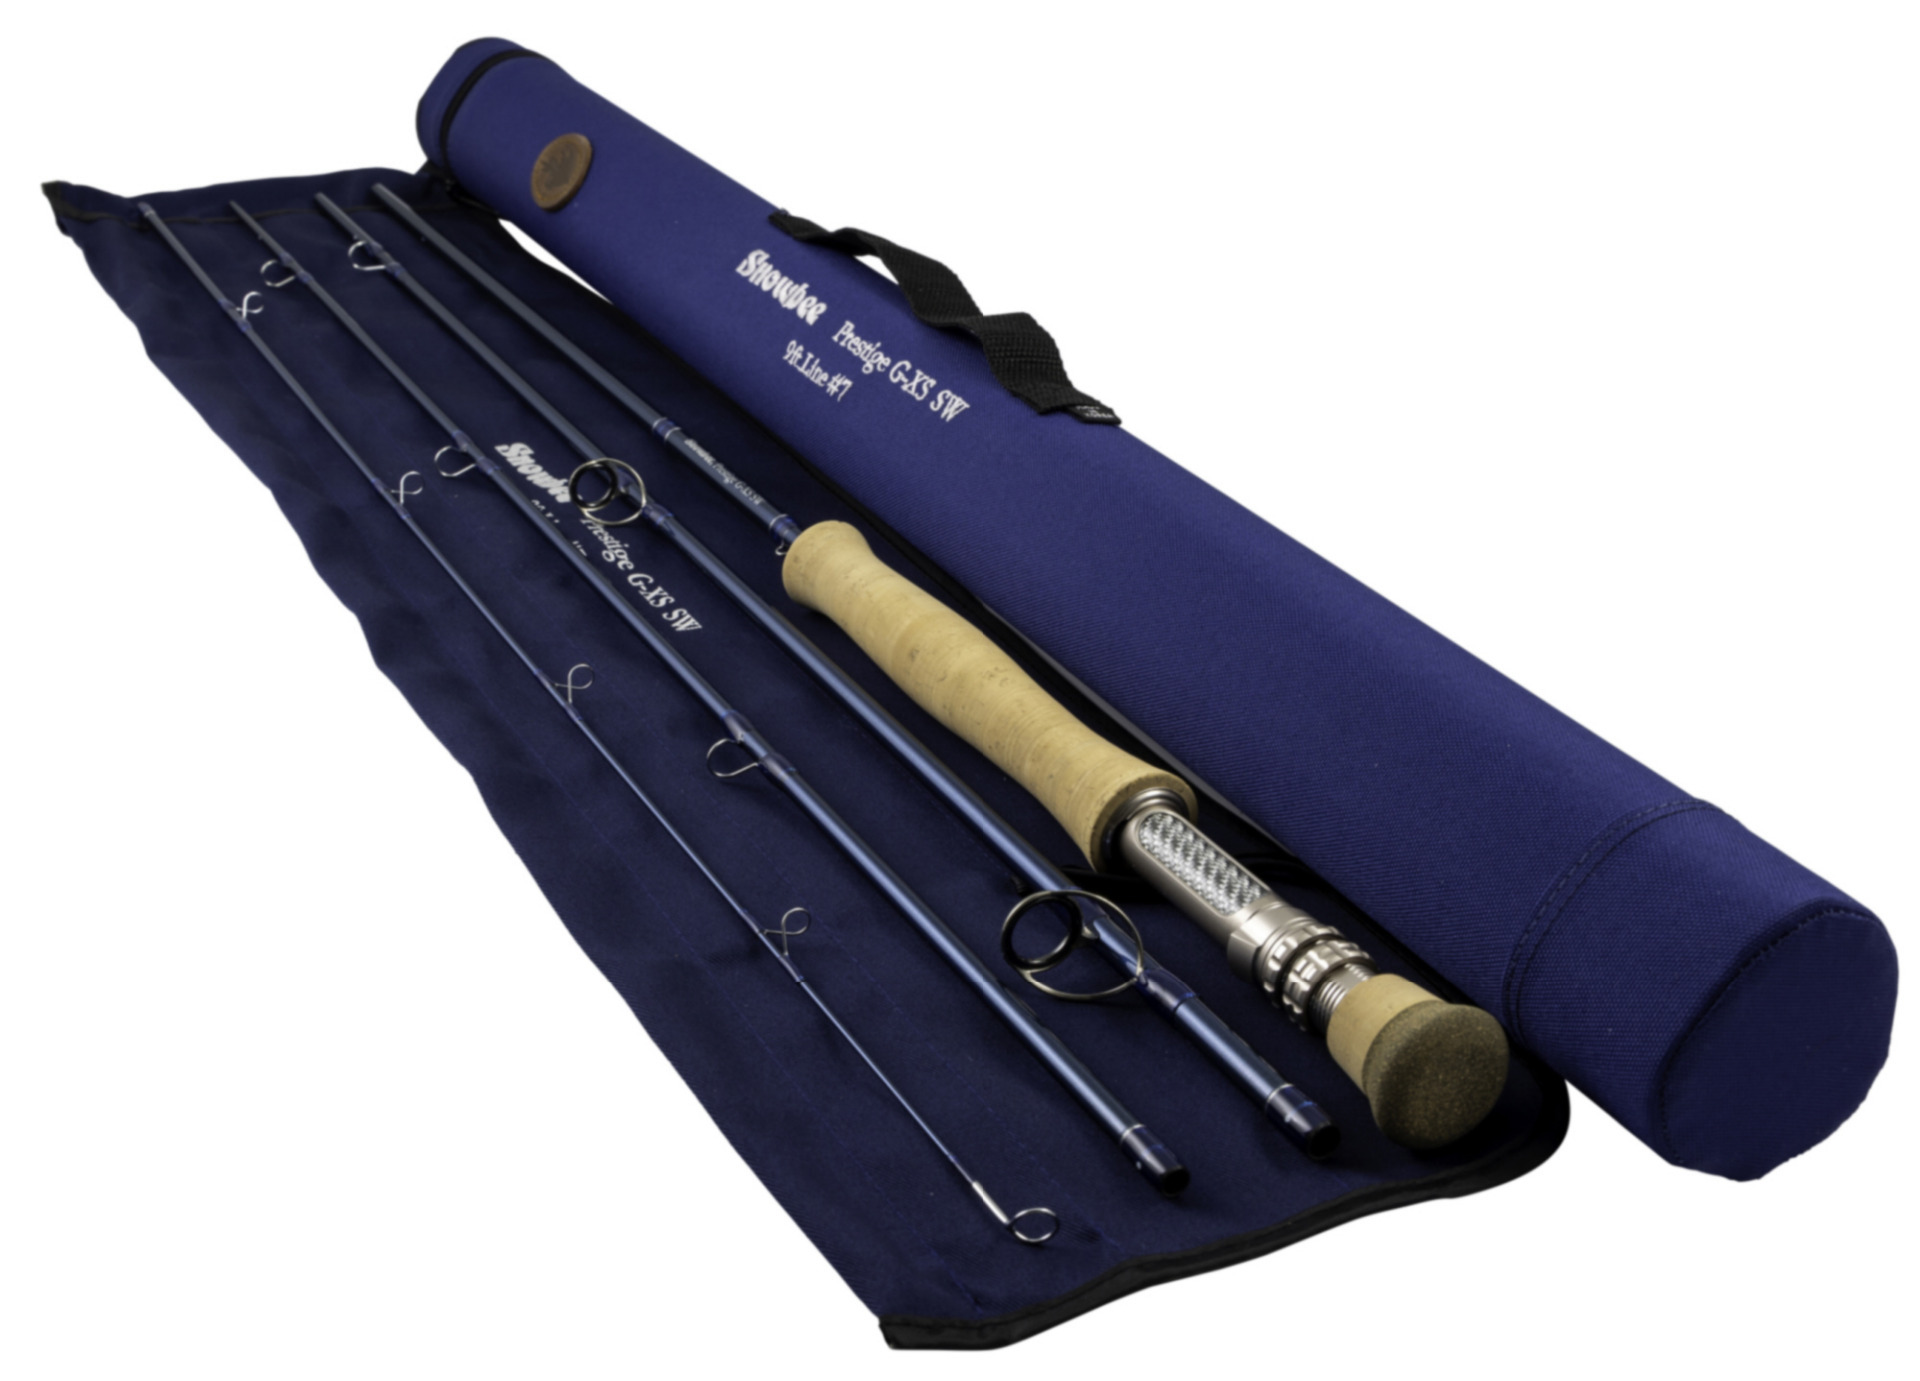 Prestige 7 WT. Saltwater Fly Rod - Saltwater on the Fly